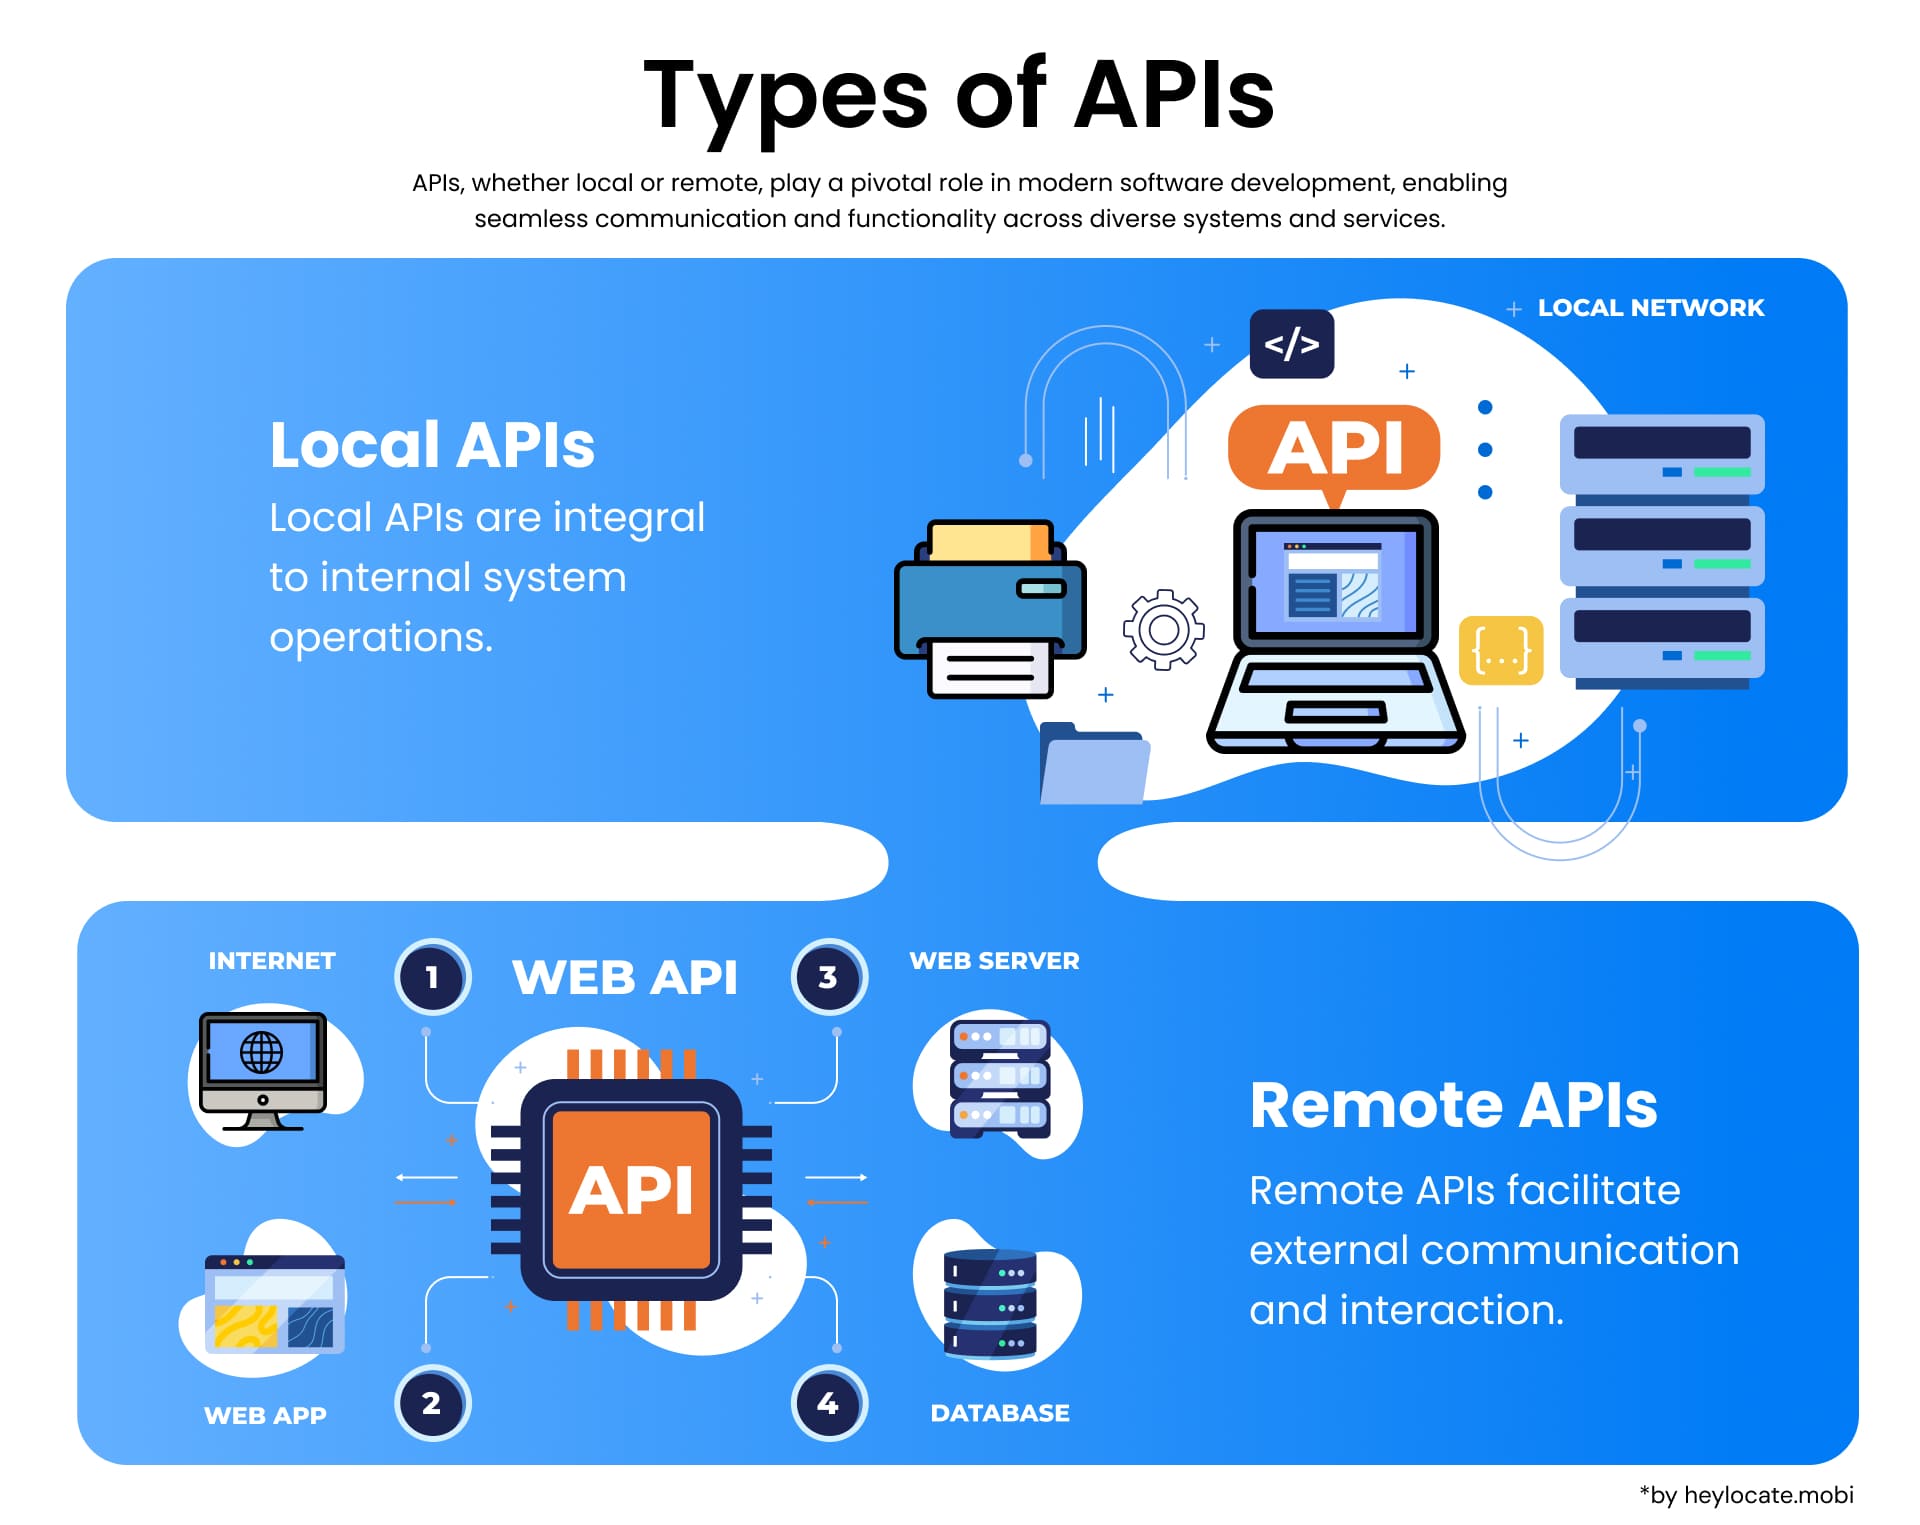 Educational graphic showing two types of APIs: Local APIs, which are essential for internal system operations and Remote APIs, which enable external communication